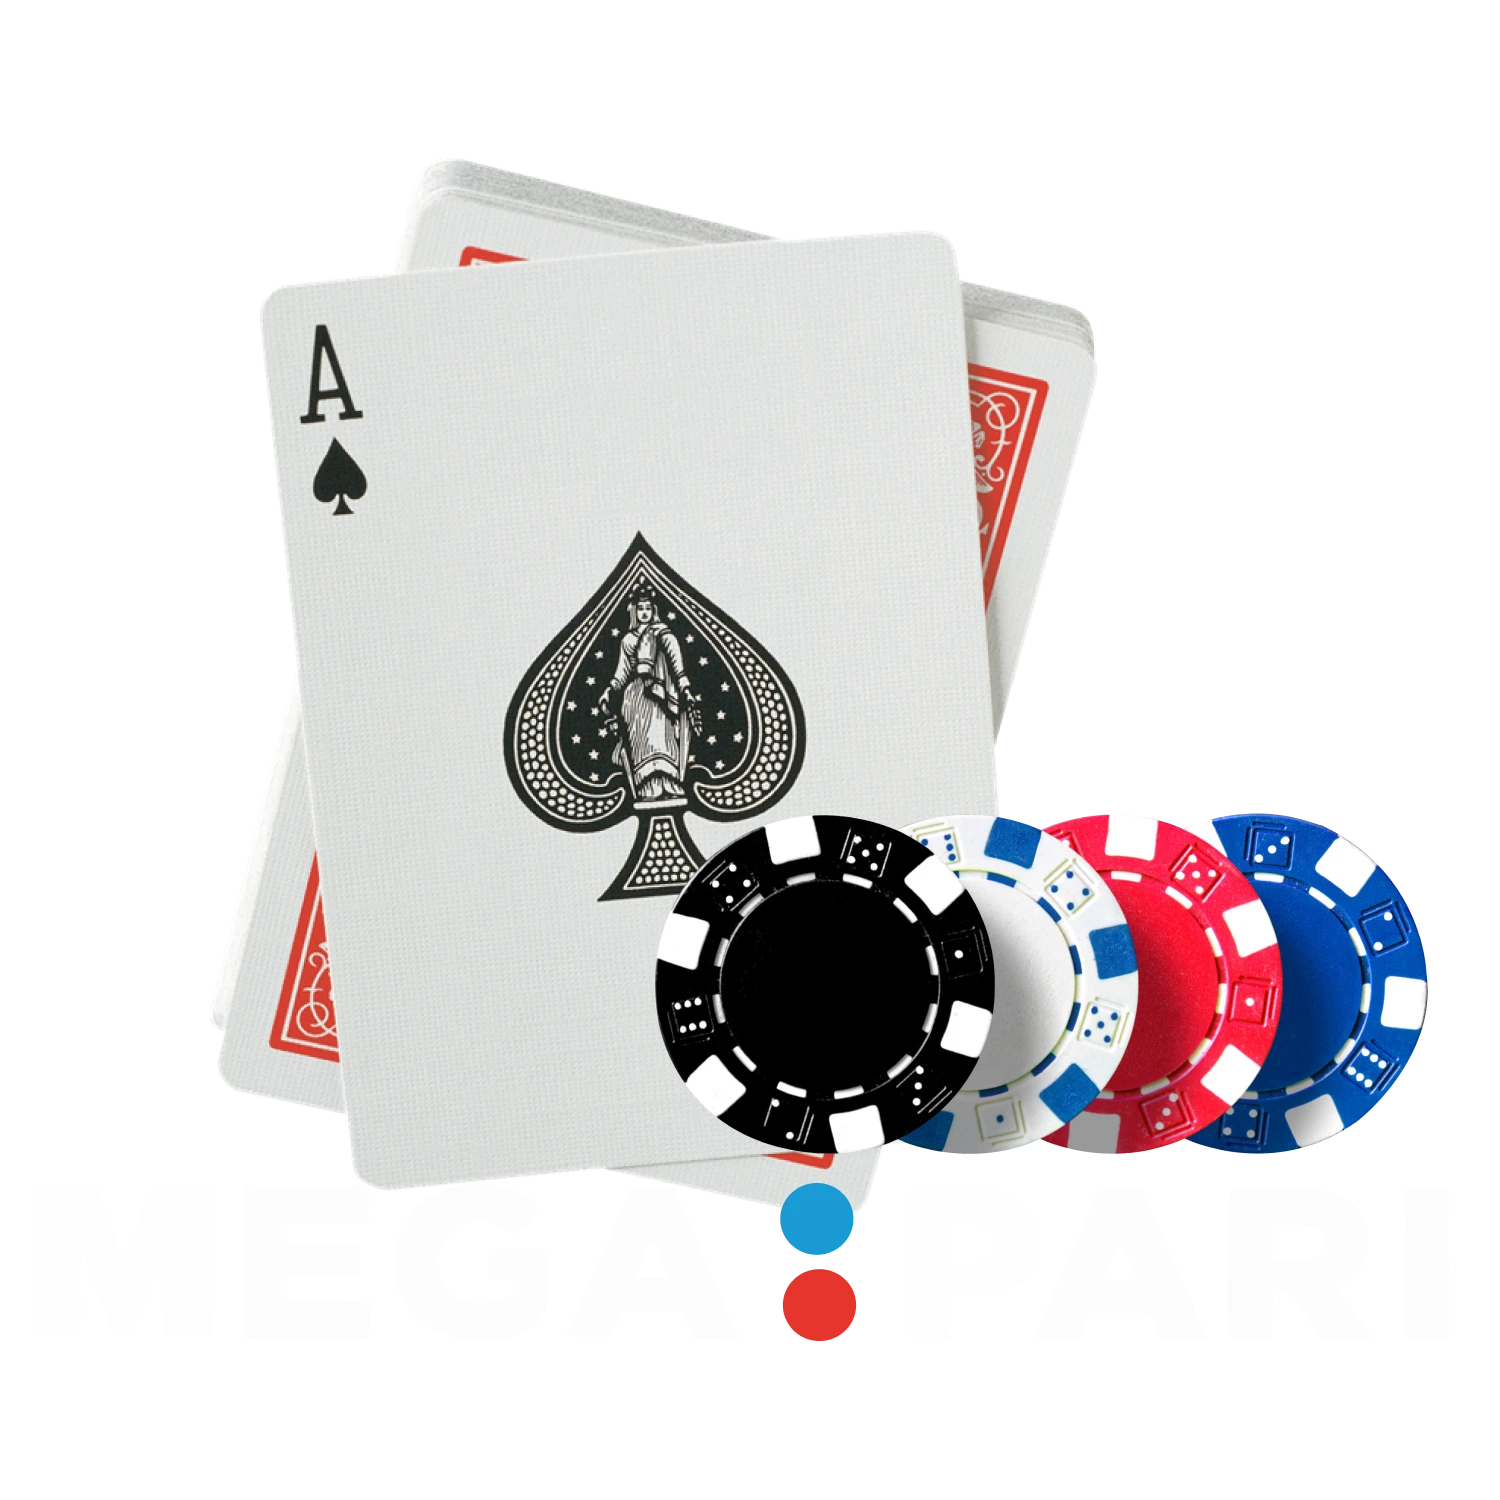 Baccarat is the game of choice at Megapari.